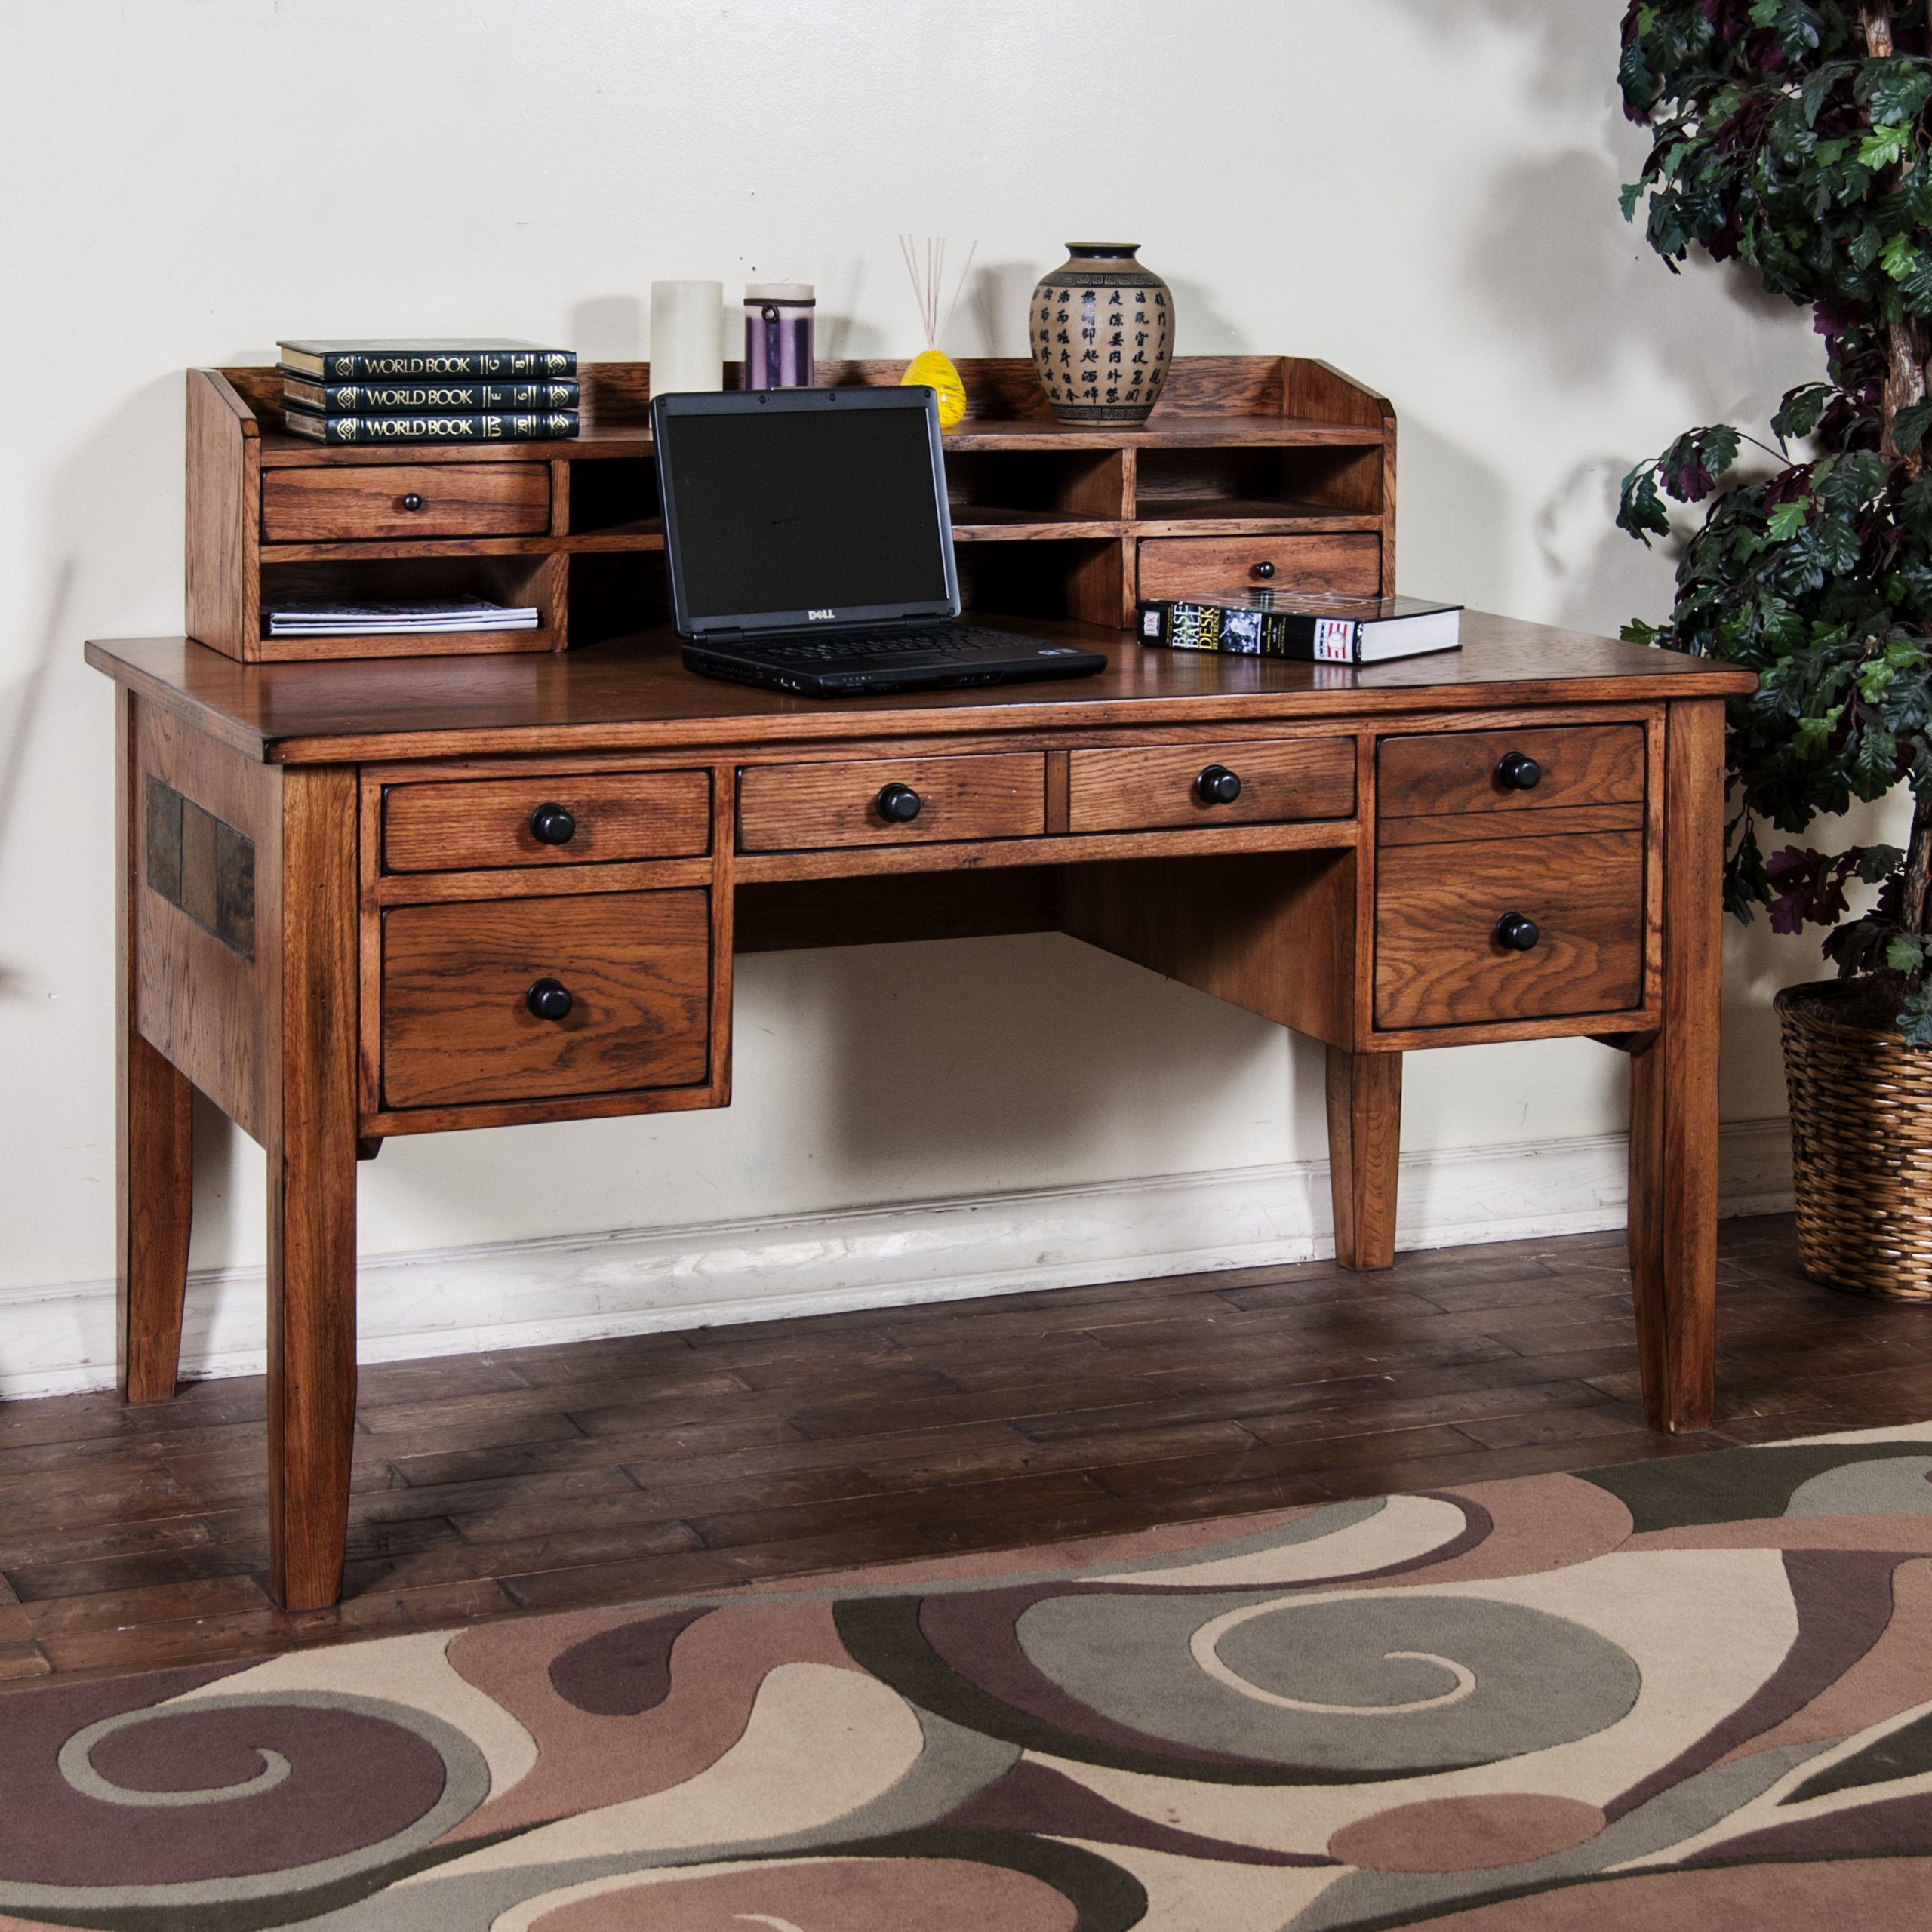 Sedona Rustic Oak Wood Writing Desks W/hutch | The Classy Home Pertaining To Rustic Acacia Wooden Writing Desks (View 6 of 15)